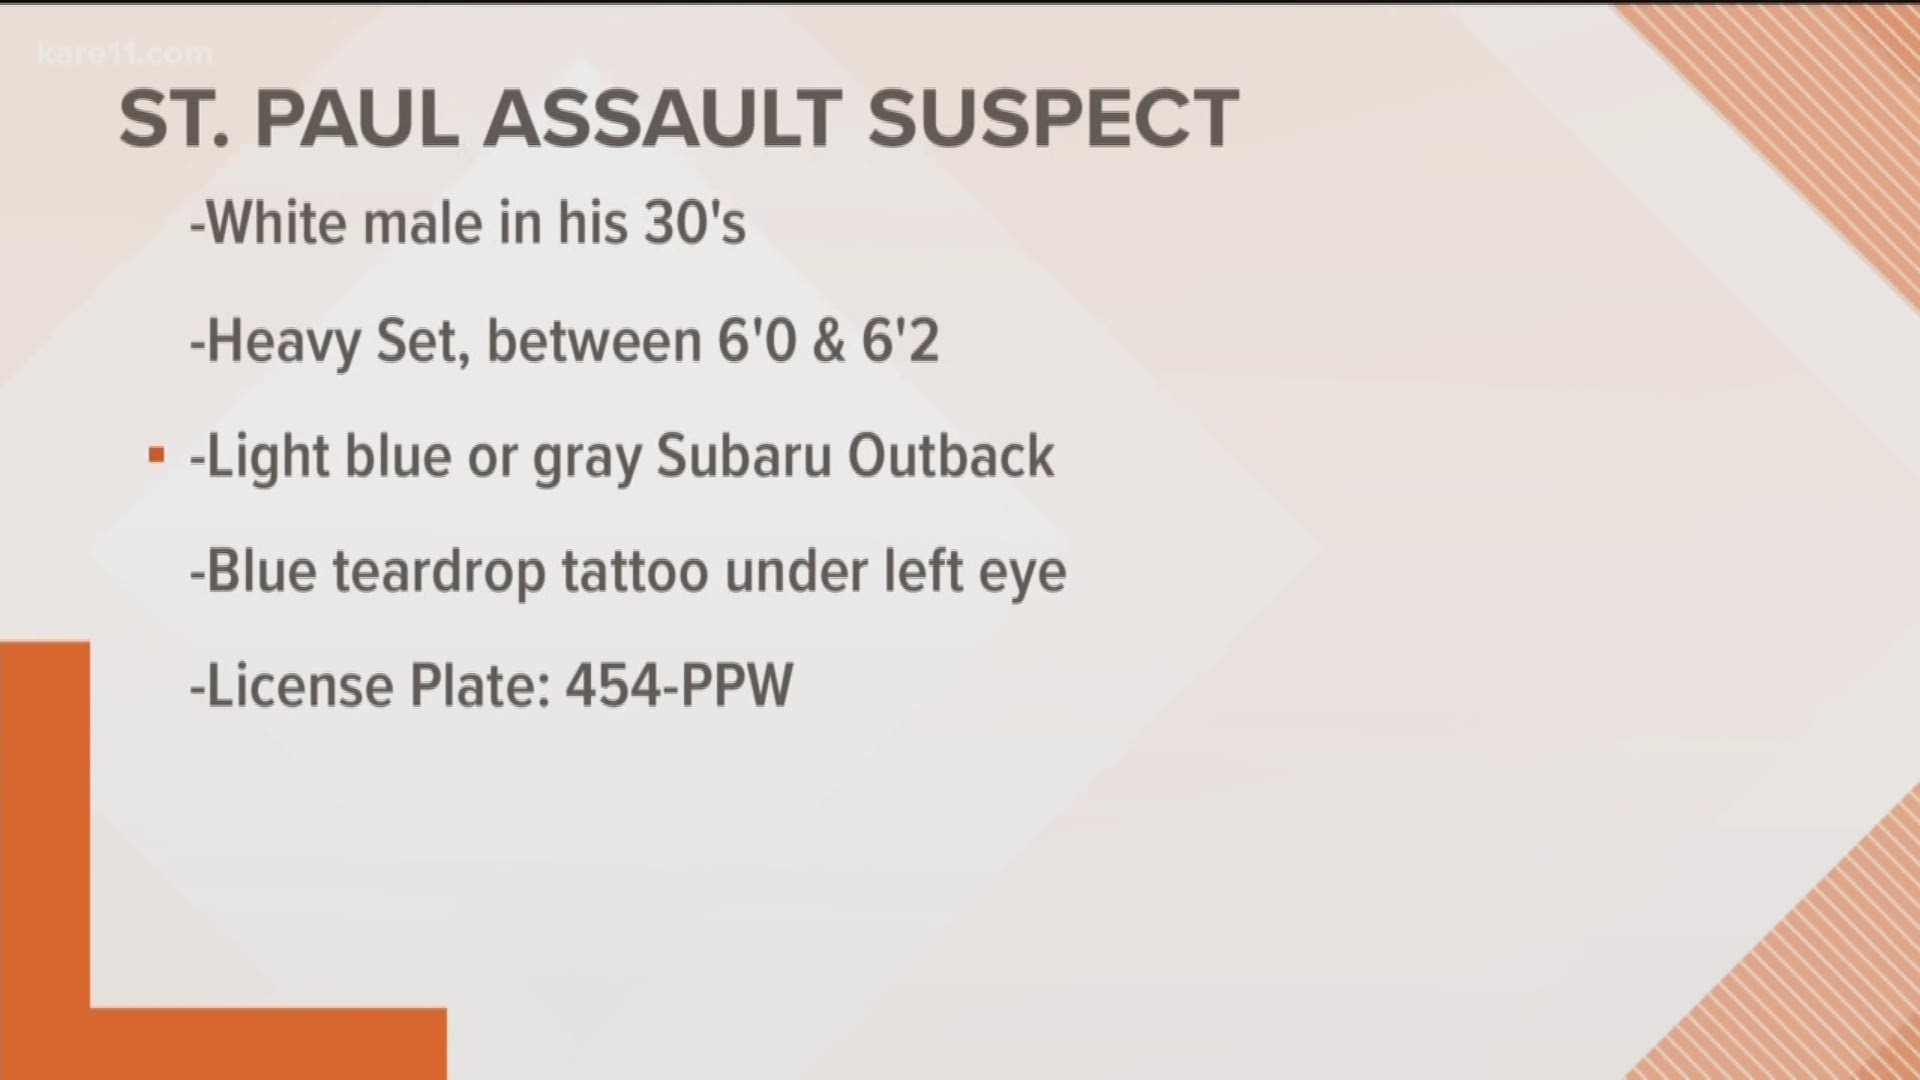 Be on the lookout for the suspect who St. Paul police described.